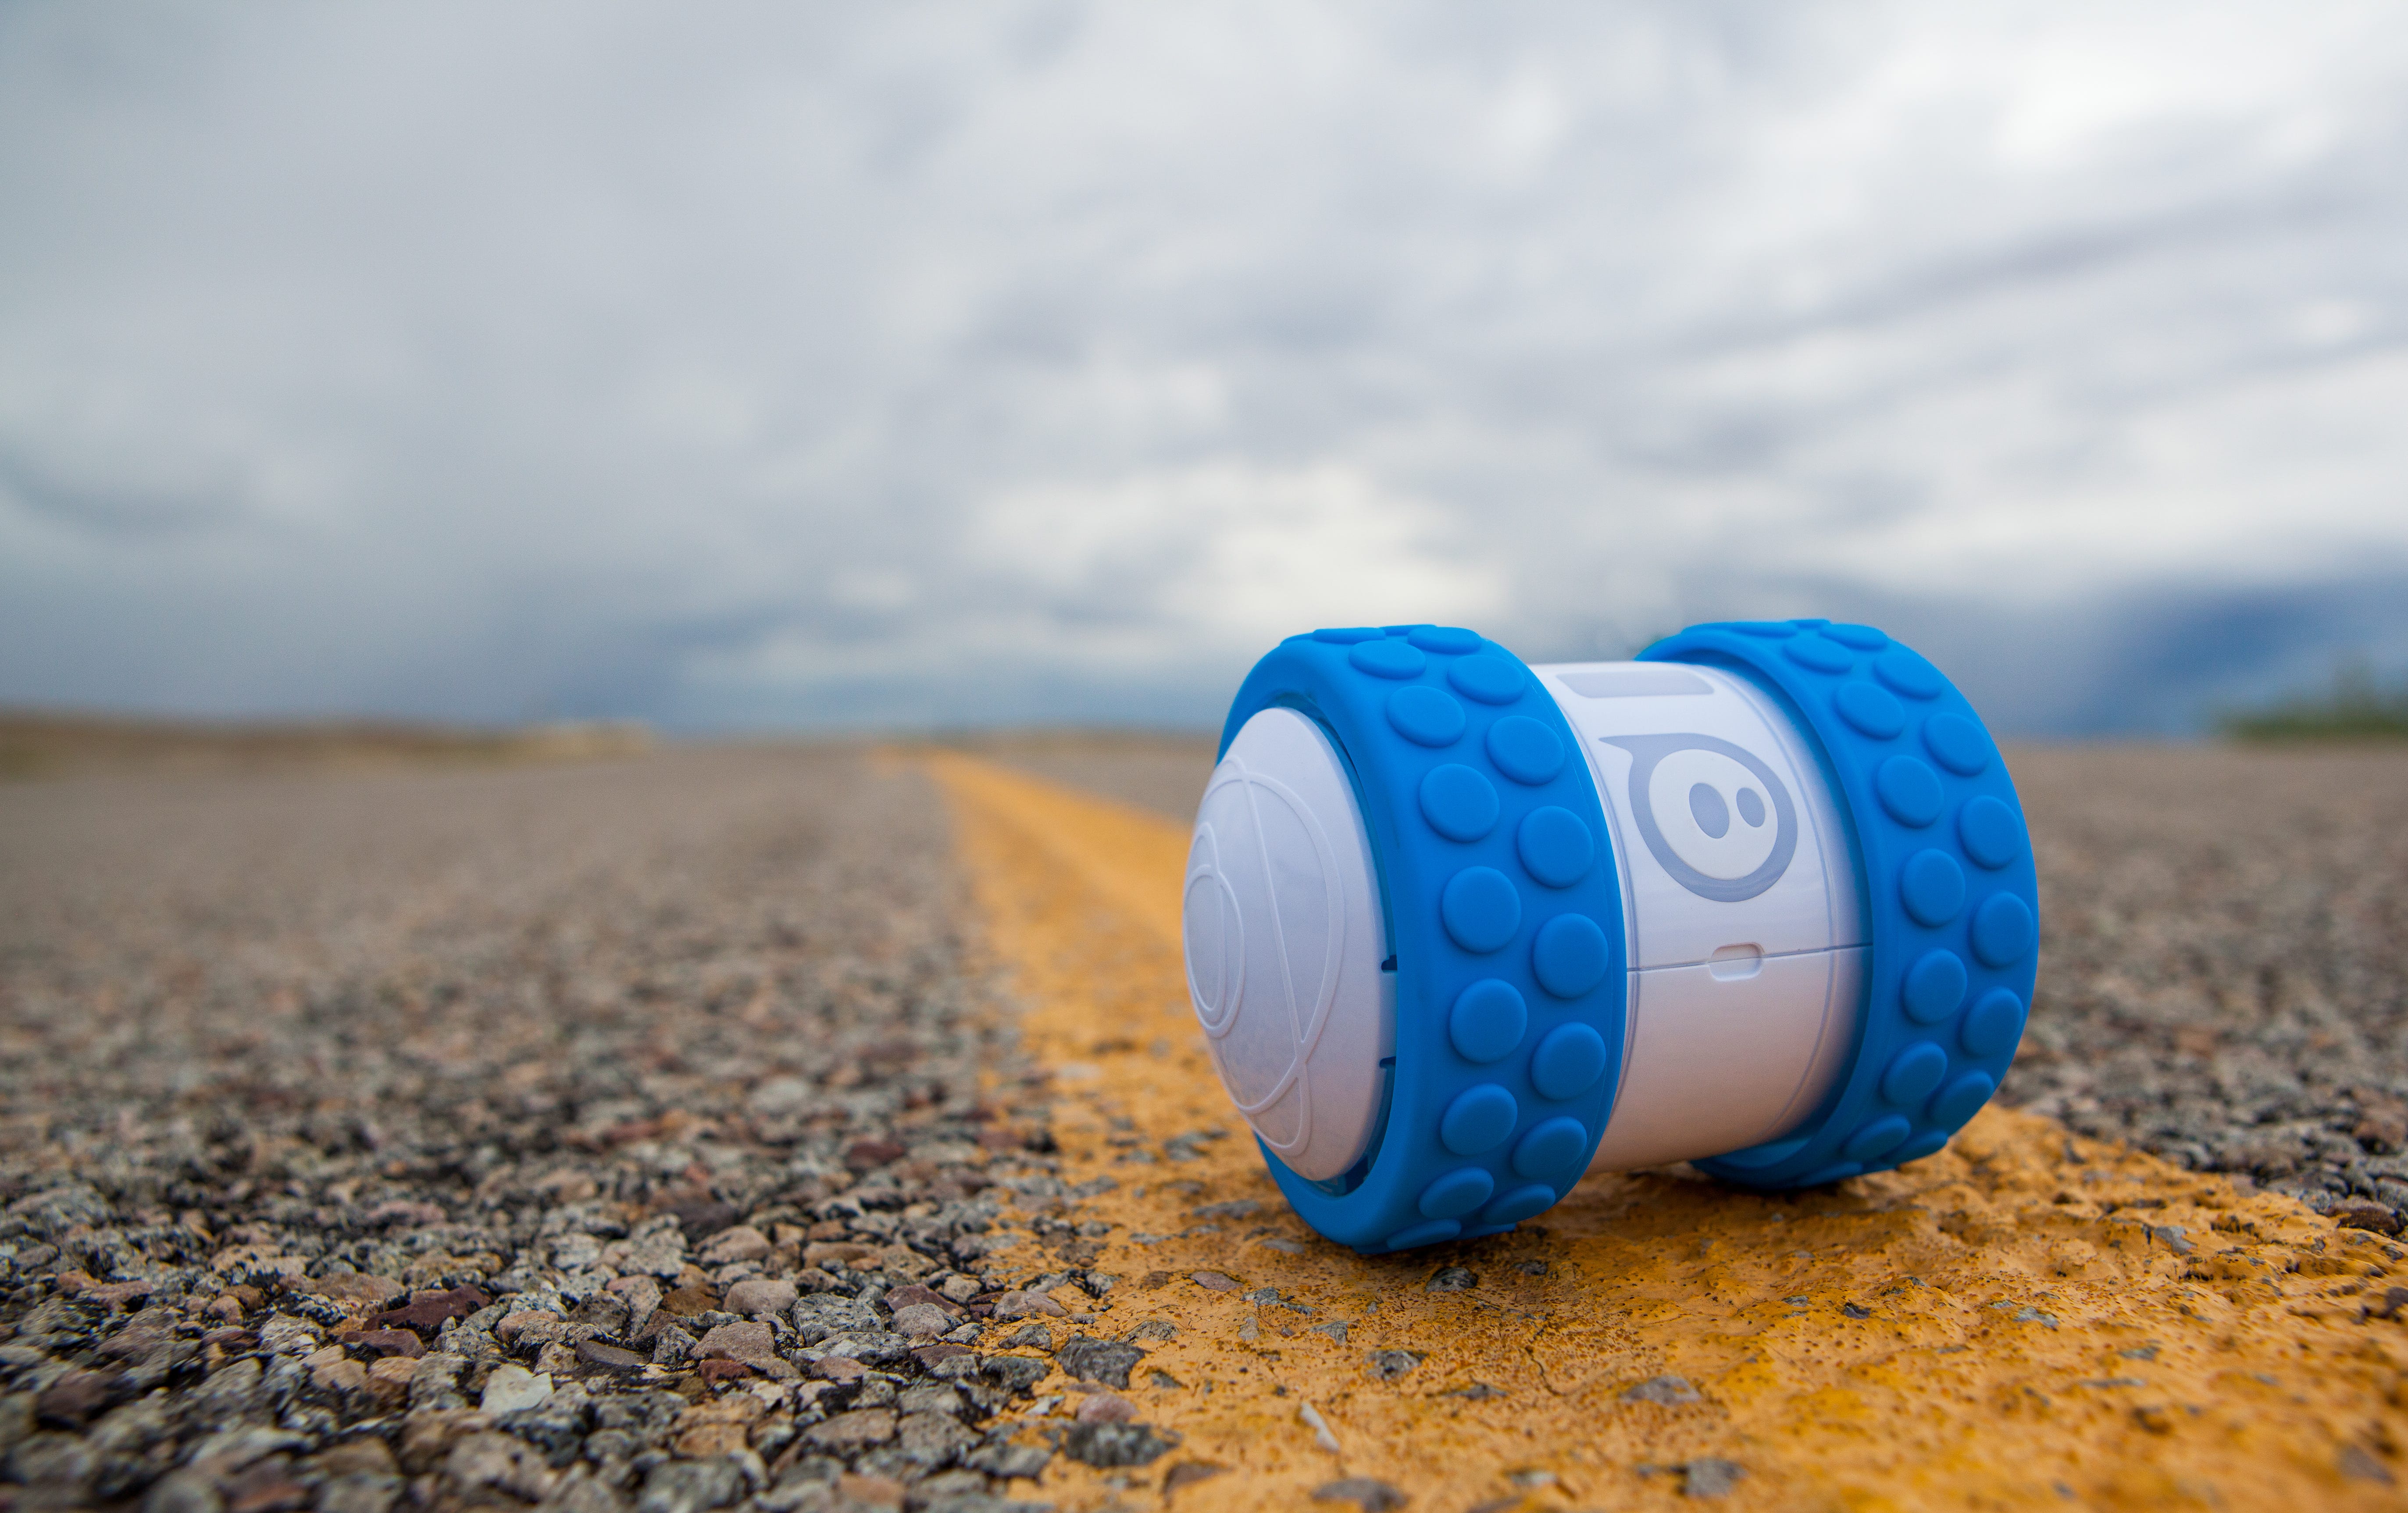 Sphero vs Ollie: Which Robot Should You Pick?